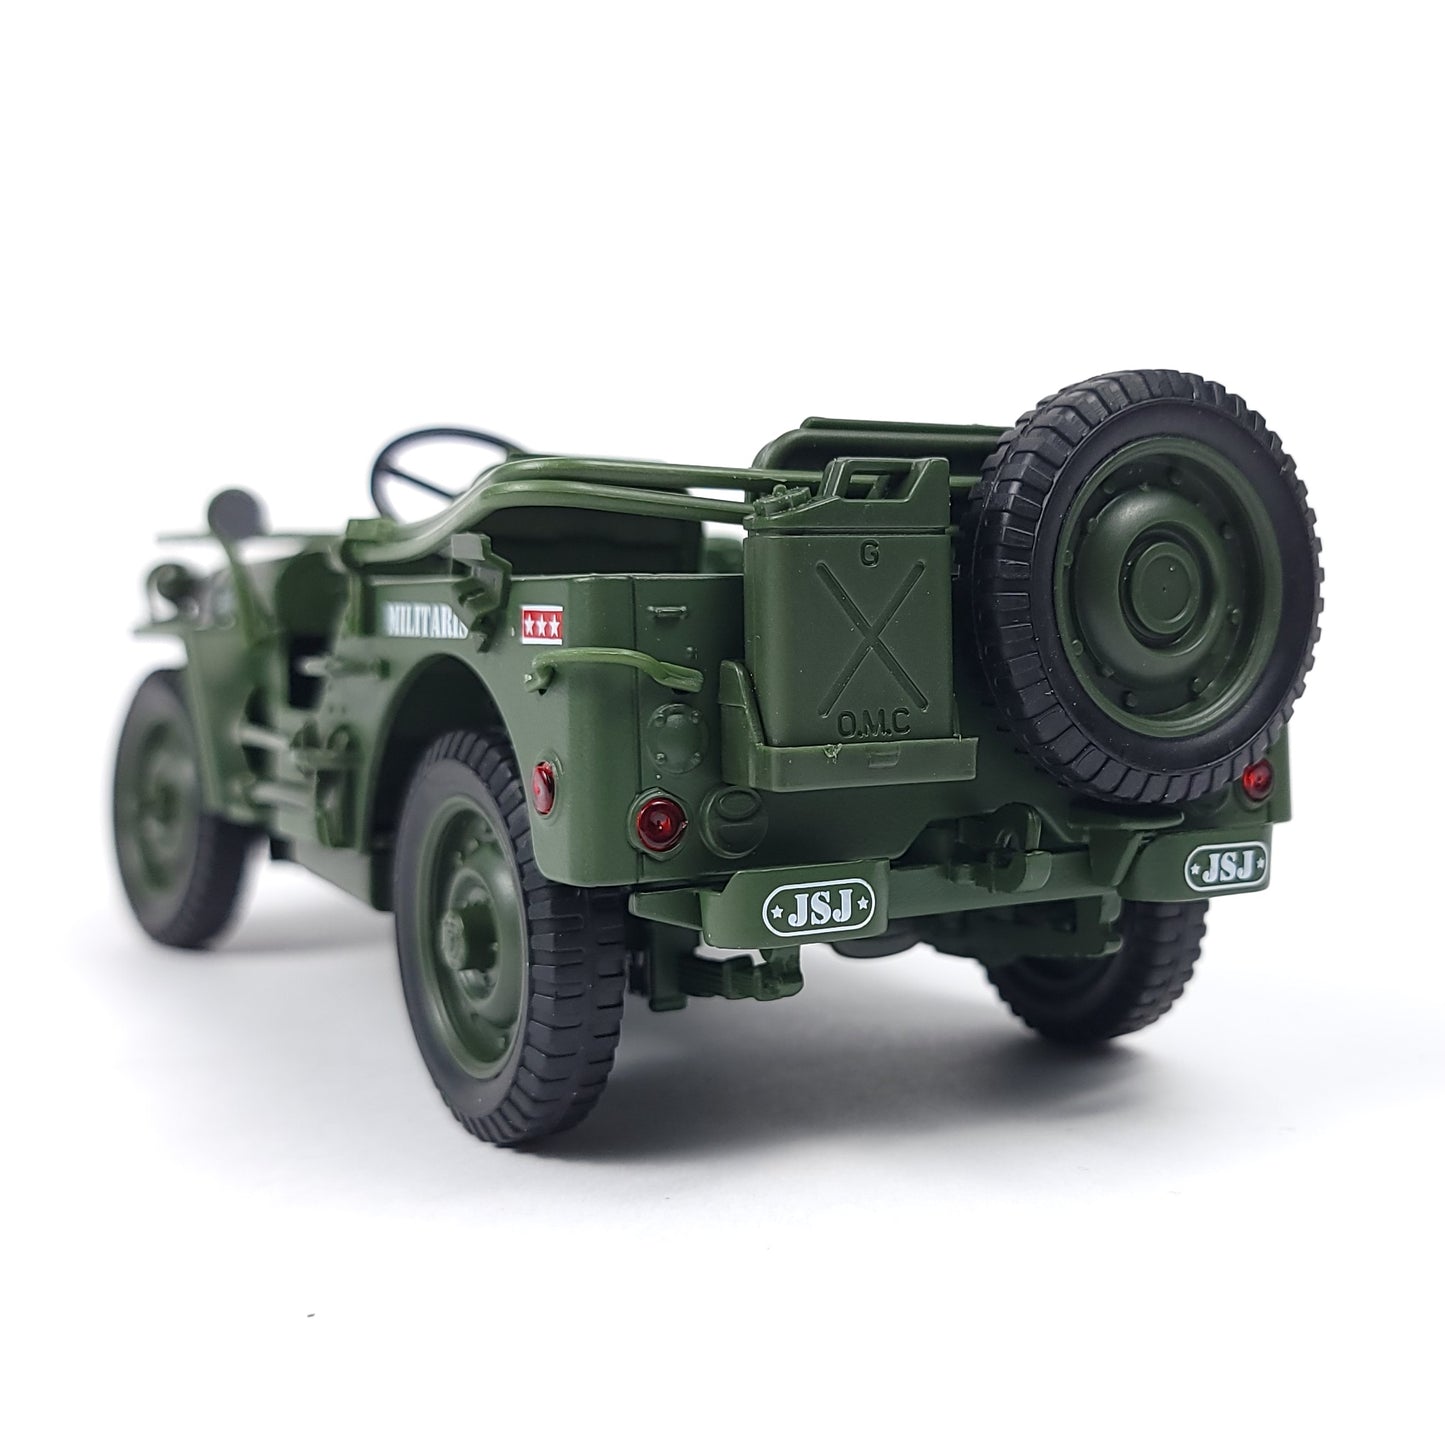 1:18 Scale Willis Tactical Jeep Model Car Metal Diecast Military Armored Vehicle Battlefield GP Model Toy Collection Gift